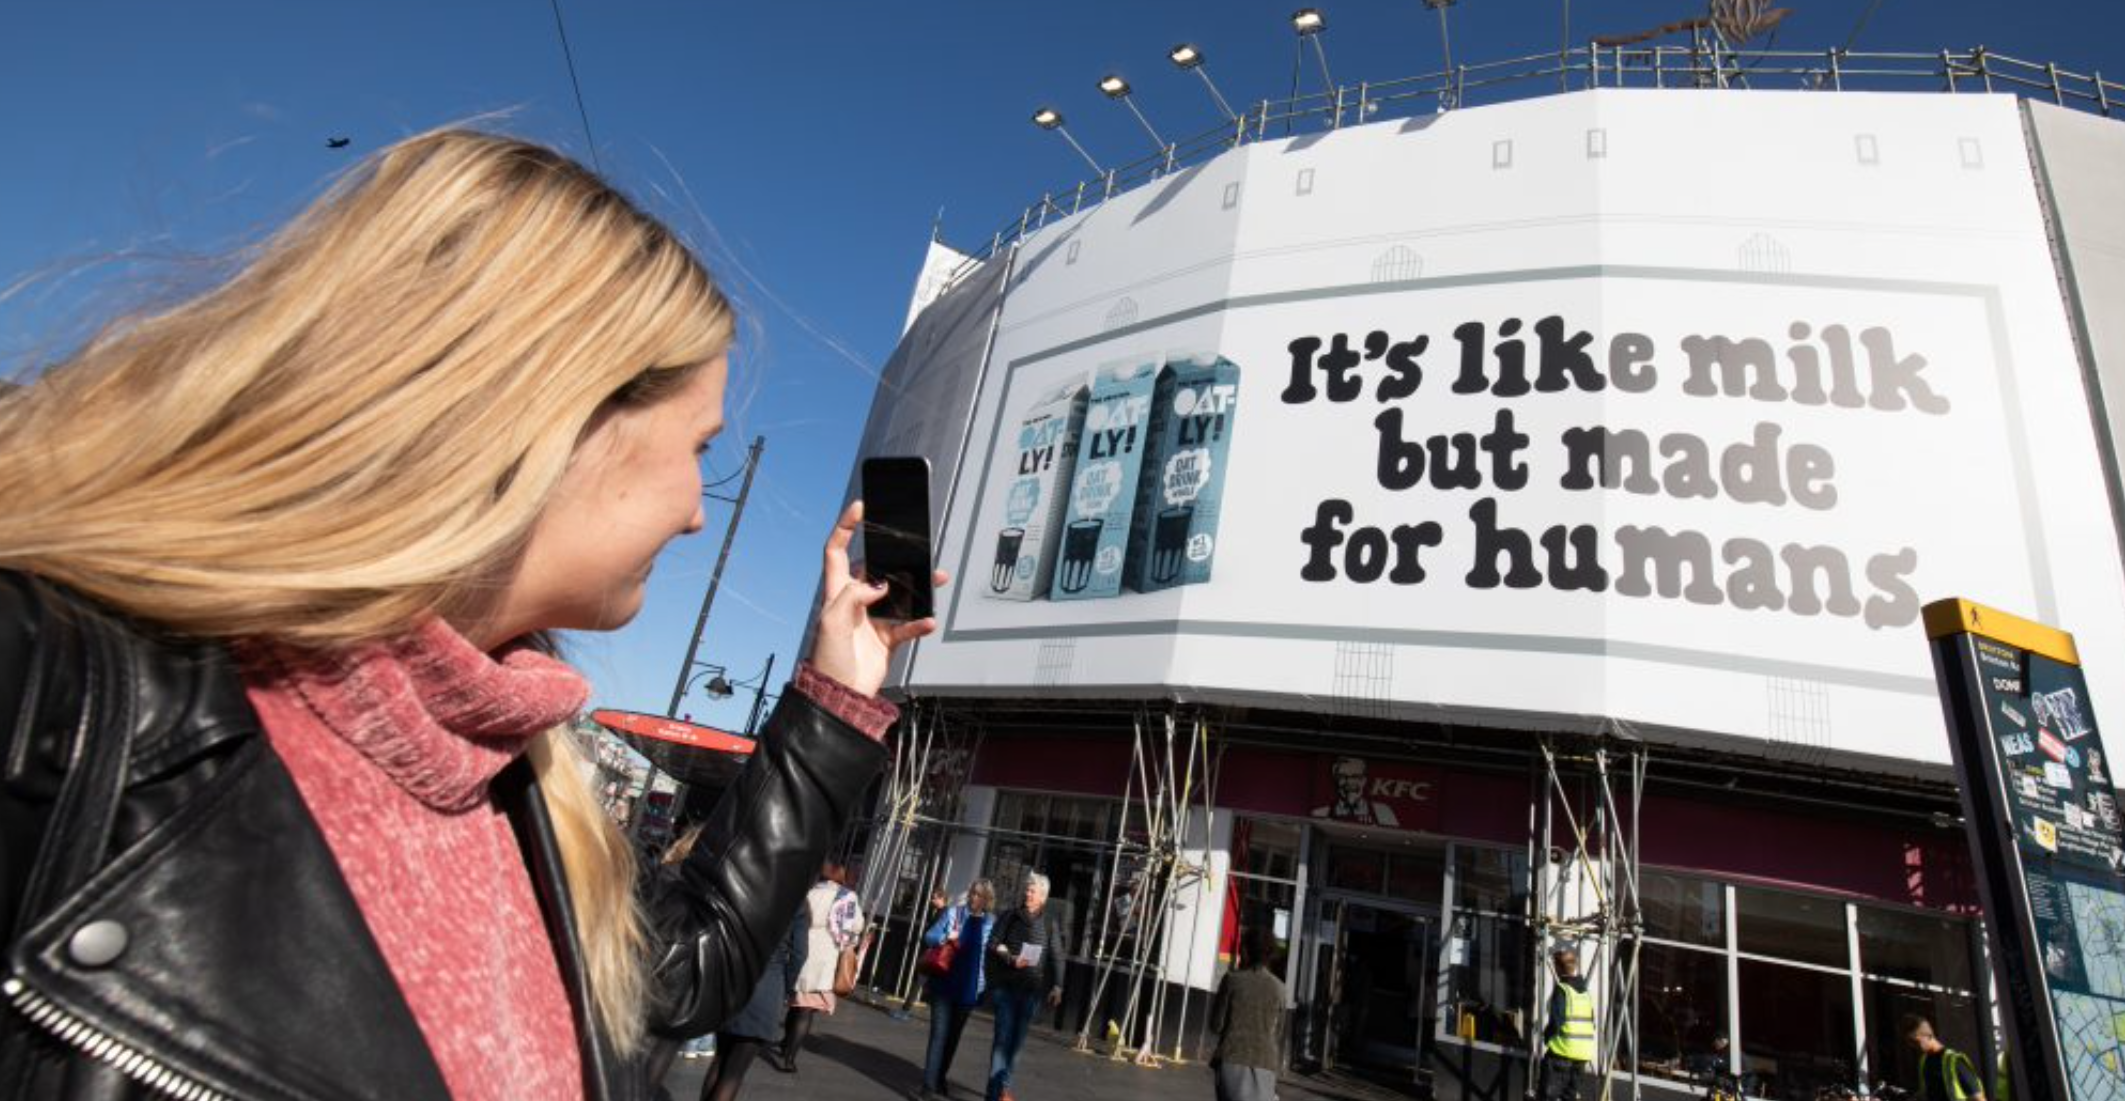 An image showing Oatly on billboards in London for the SmartCuts blog post.